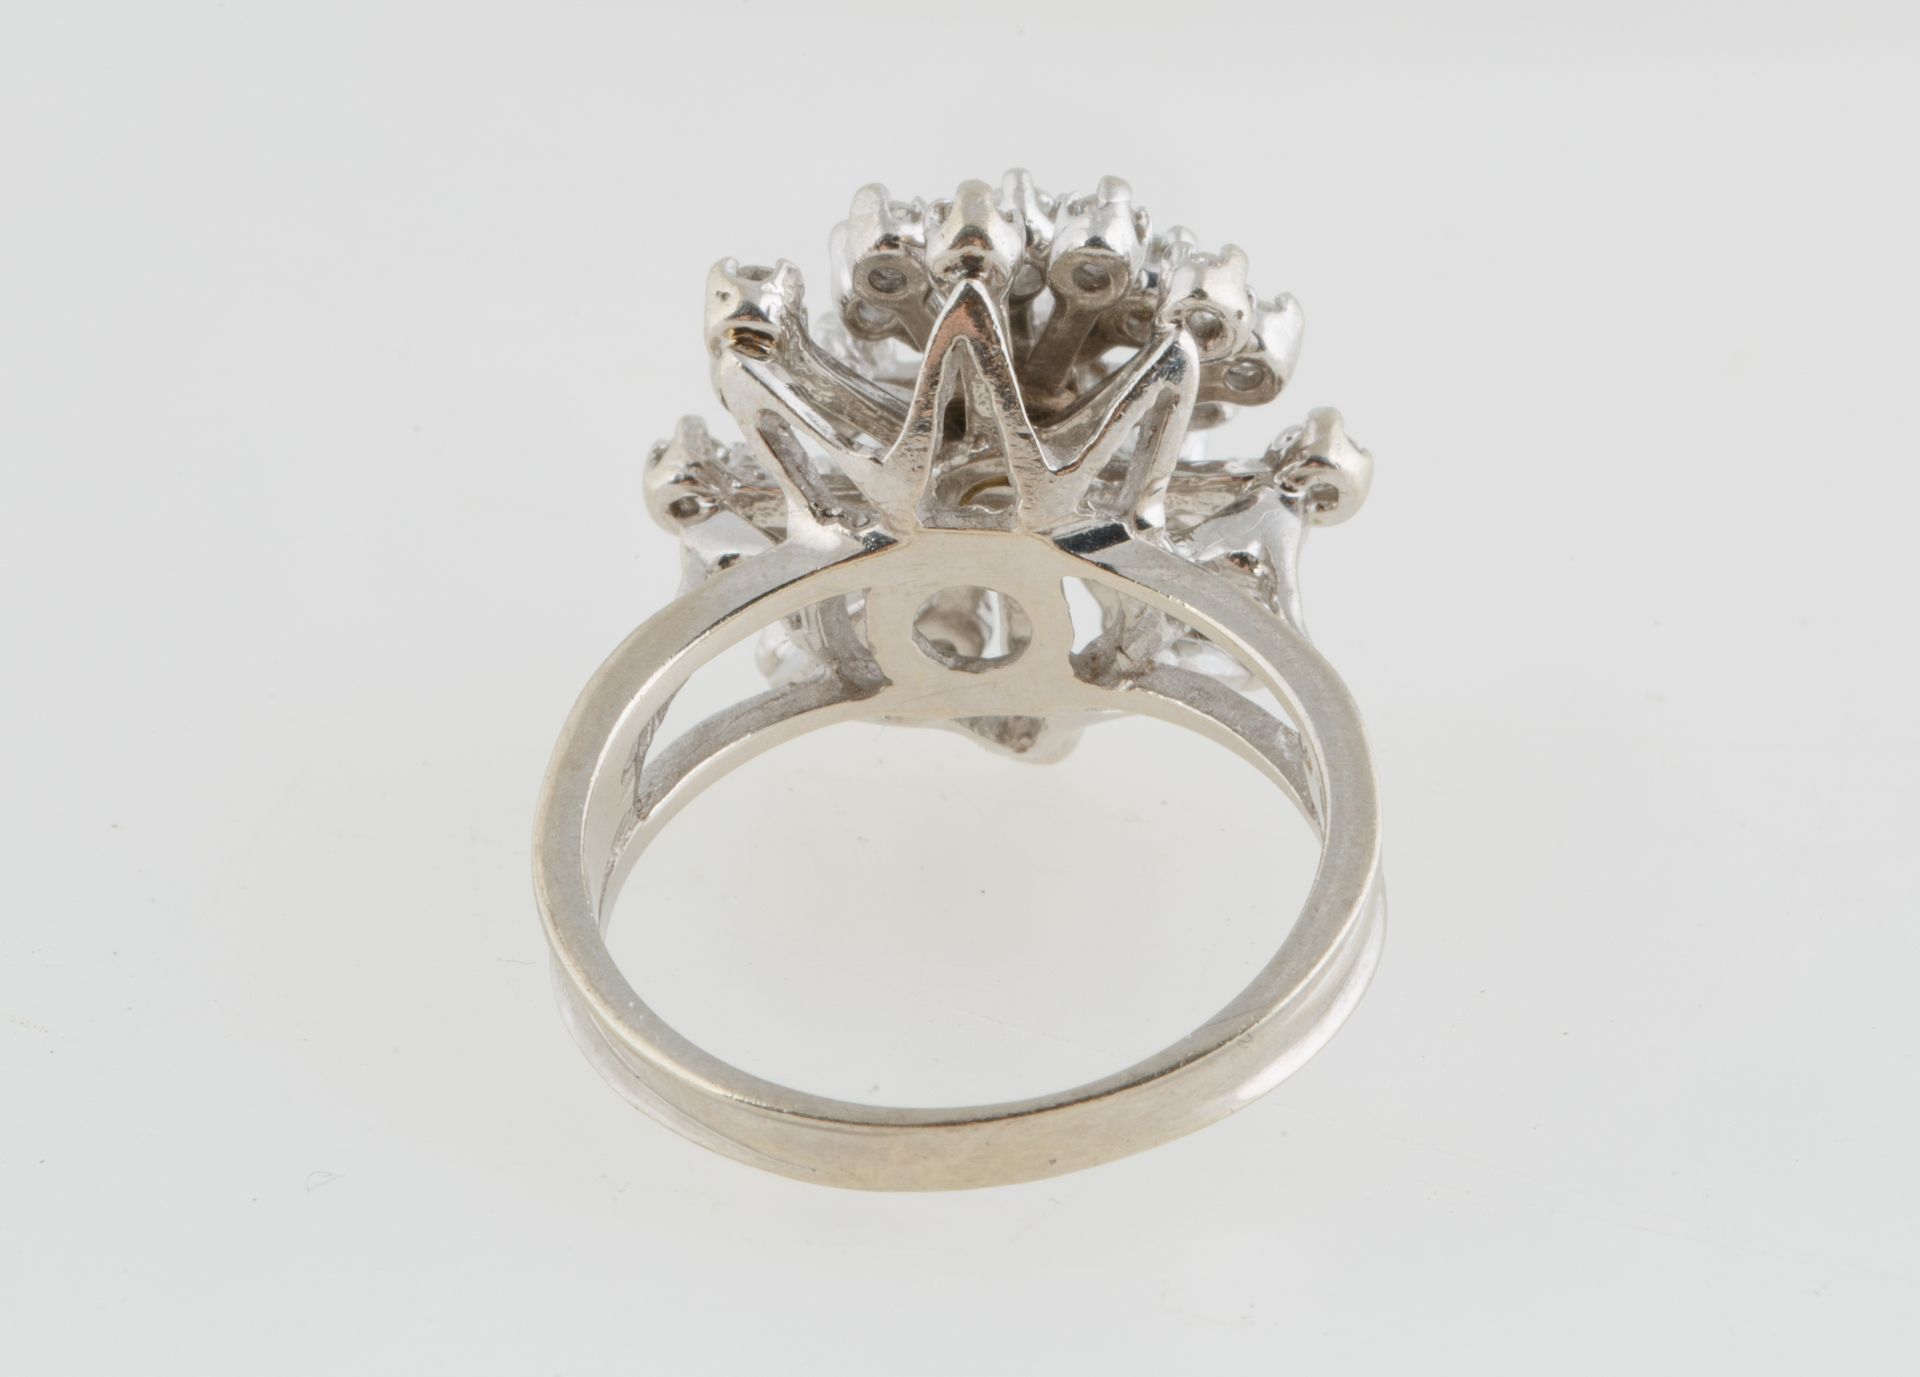 14KT WHITE GOLD AND DIAMOND RING - Image 3 of 6